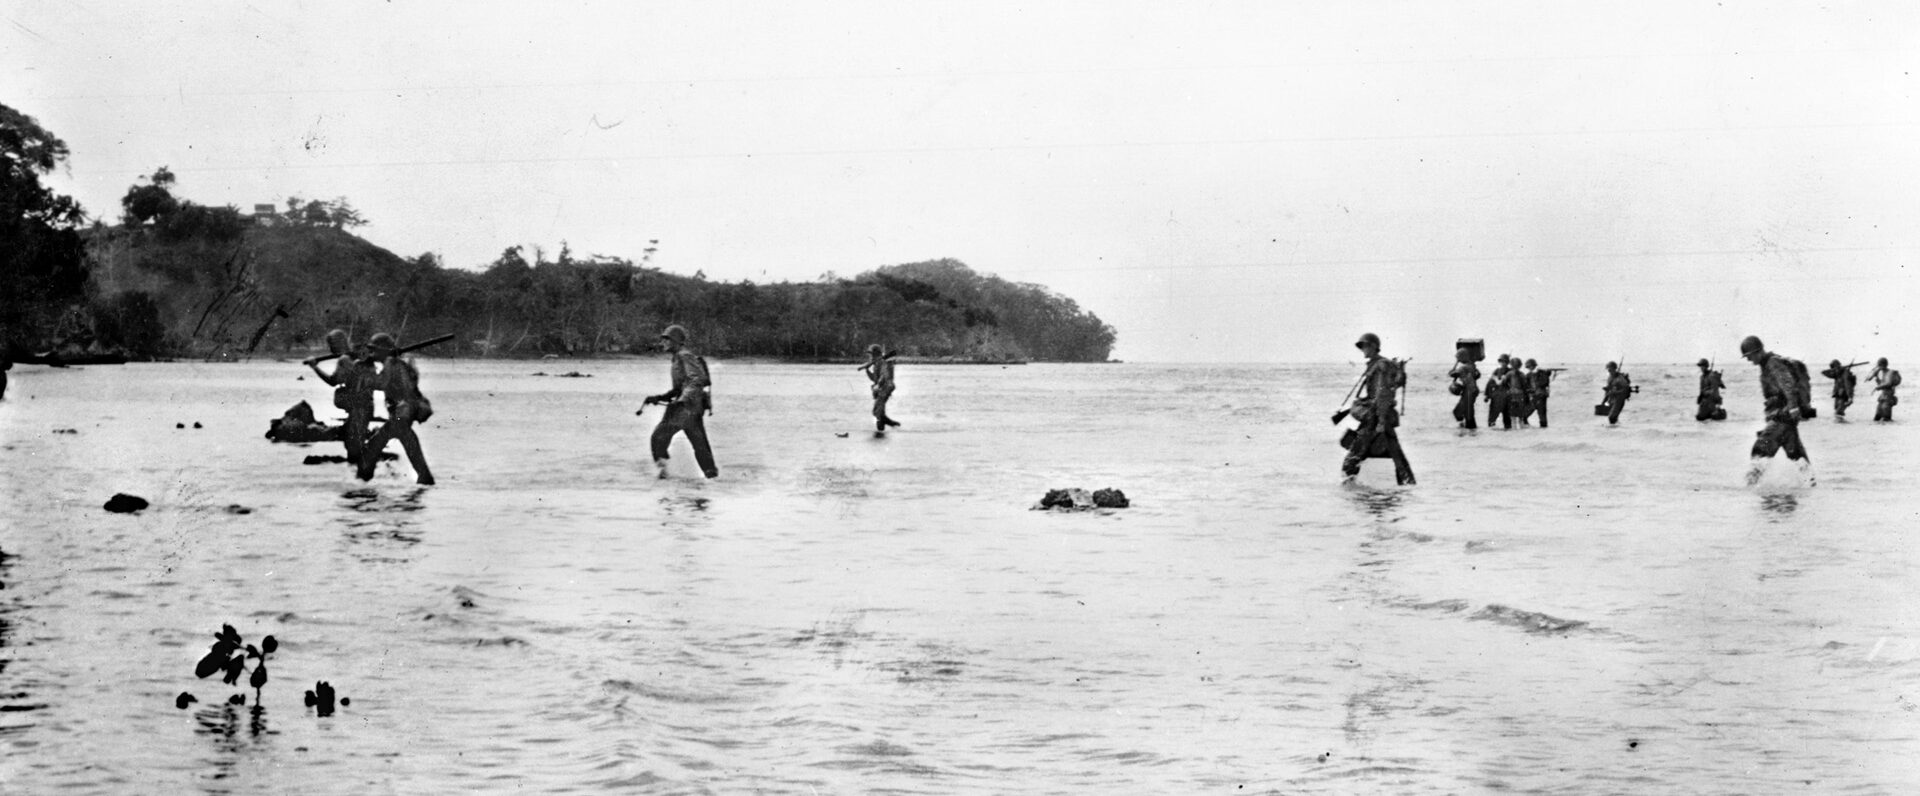 The invasion of Tulagi Island was part of Operation Watchtower, the Guadalcanal/Solomons campaign. Here men of the 1st Marine Raider Battalion wade ashore after the initial fierce Japanese resistance has died down.